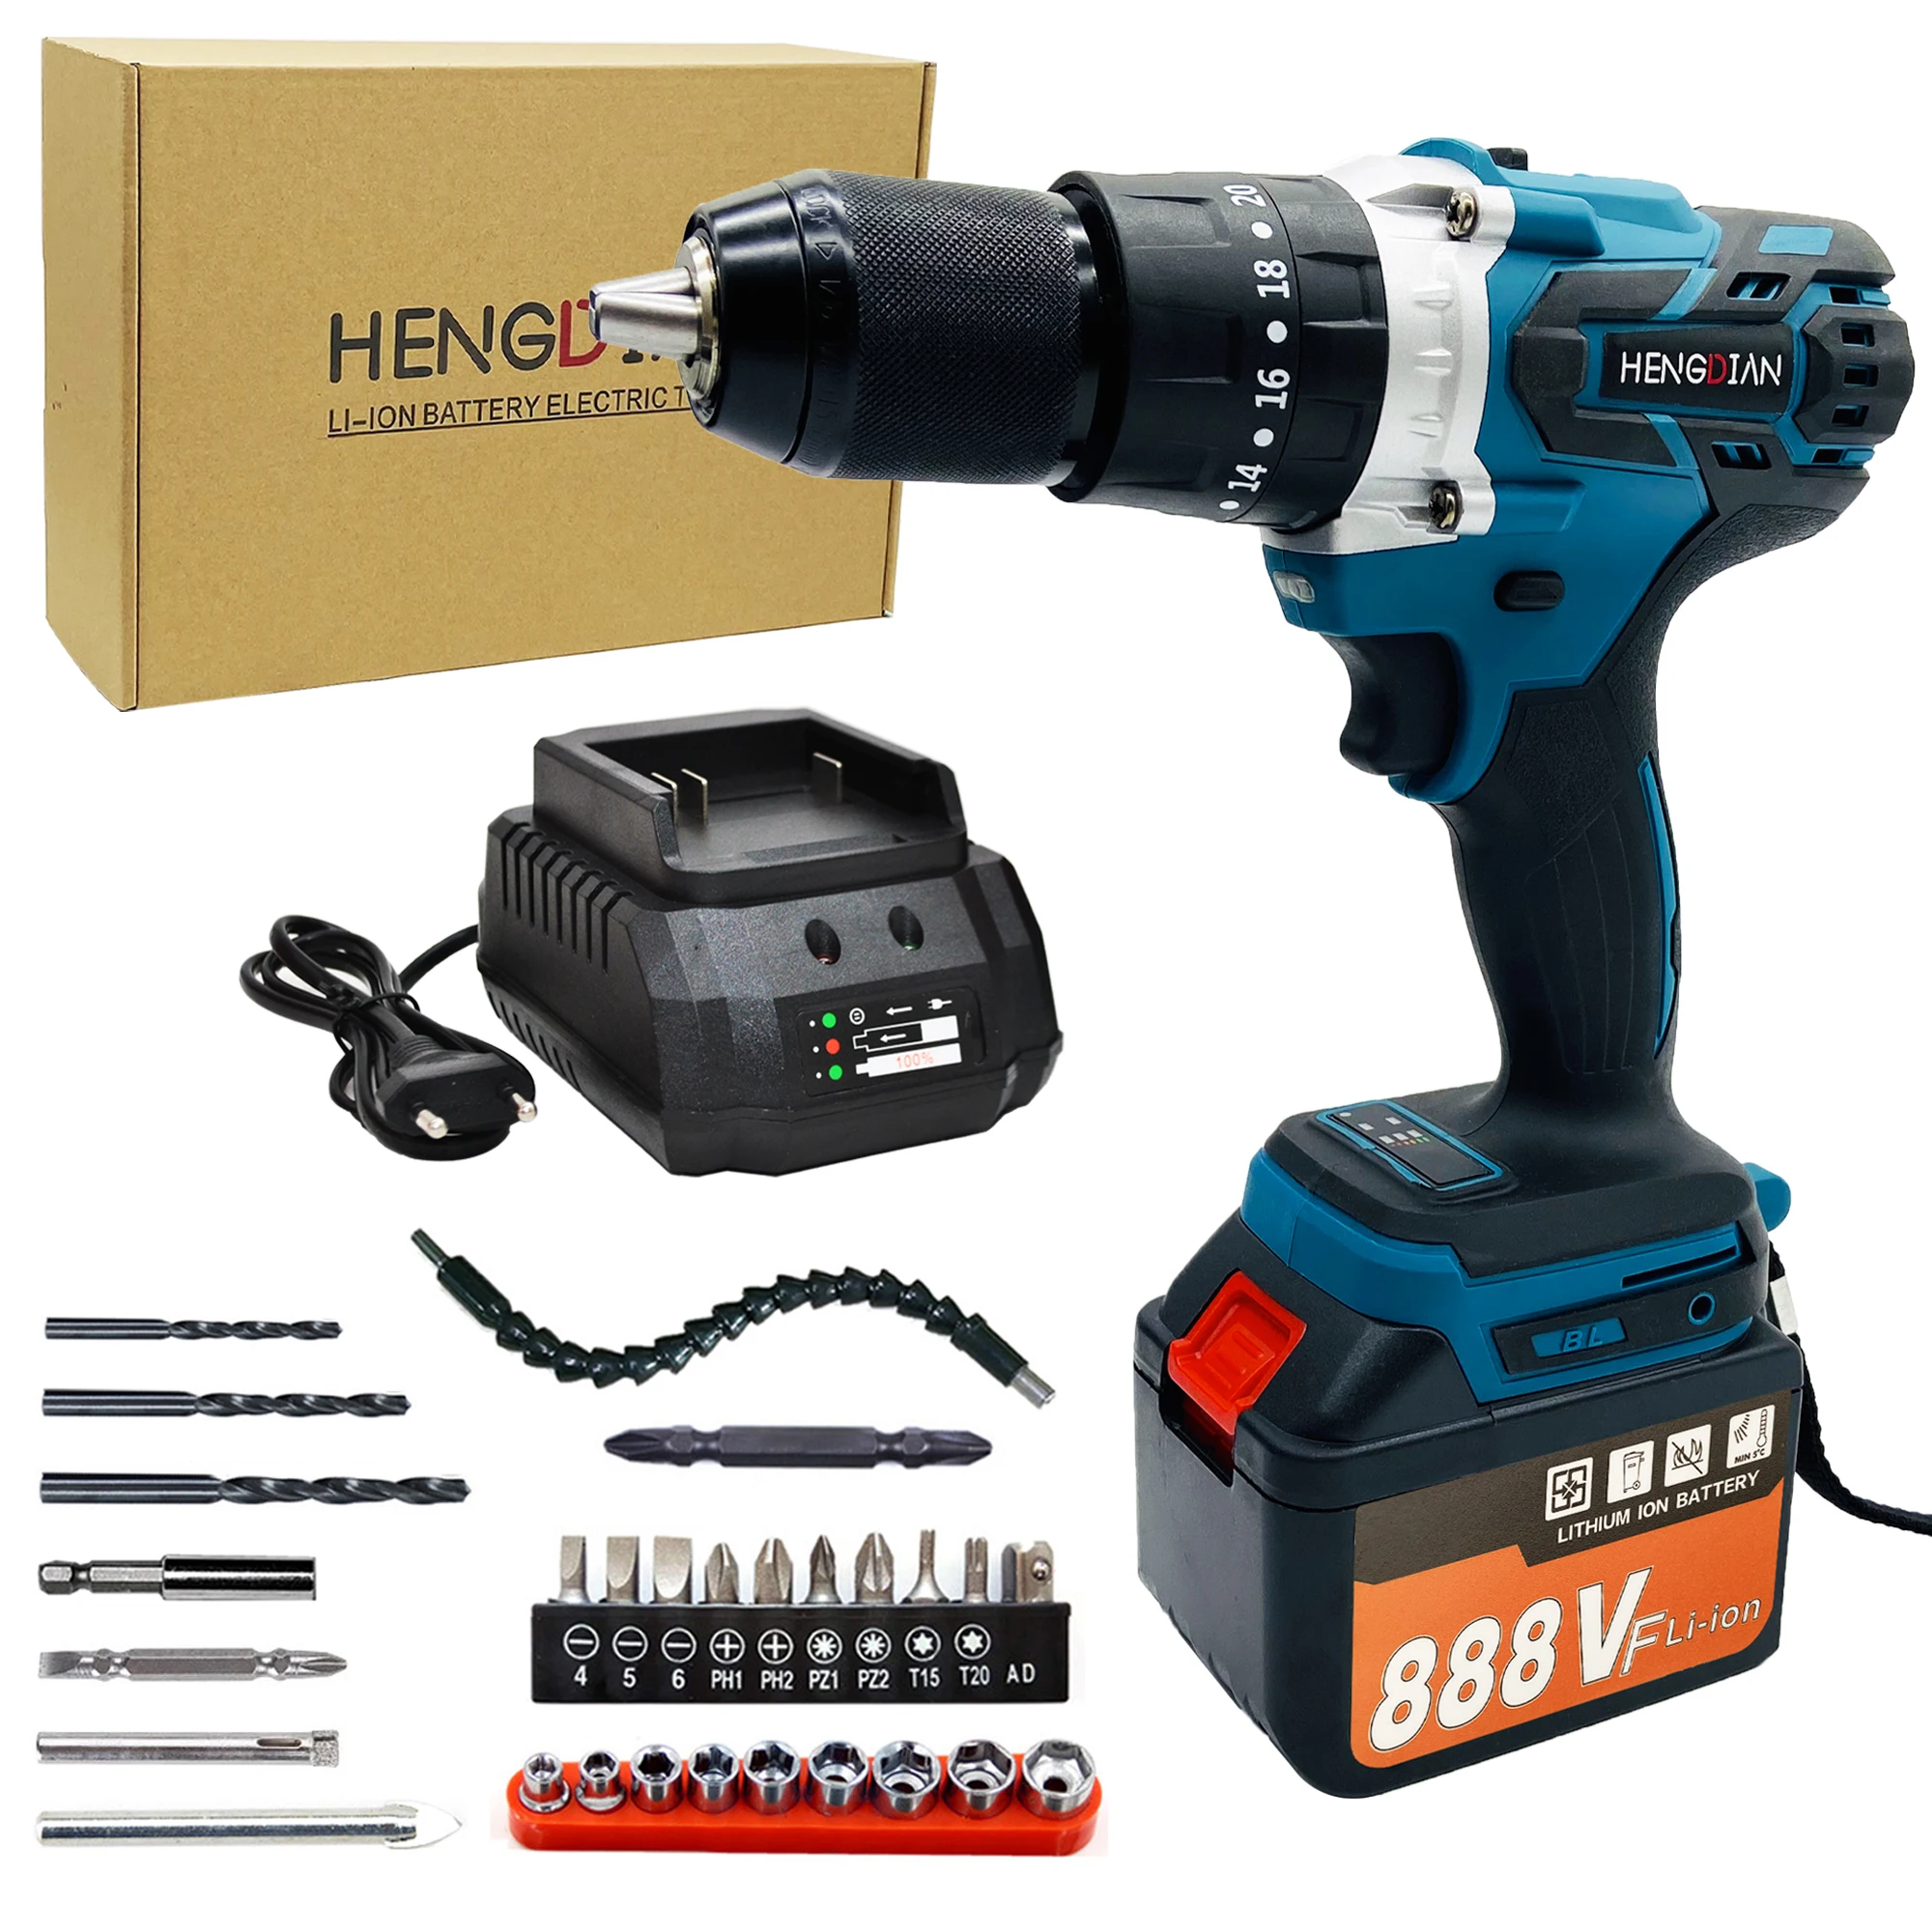 20V Brushless Battery Screwdriver Craft Drill Set Adjustable Torque Machine Impact Cordless Power Tools Electric Drill high quality machinery kit 4 0ah 5 0ah machine screwdriver impact cordless power dew 20v max power tools cordless drill